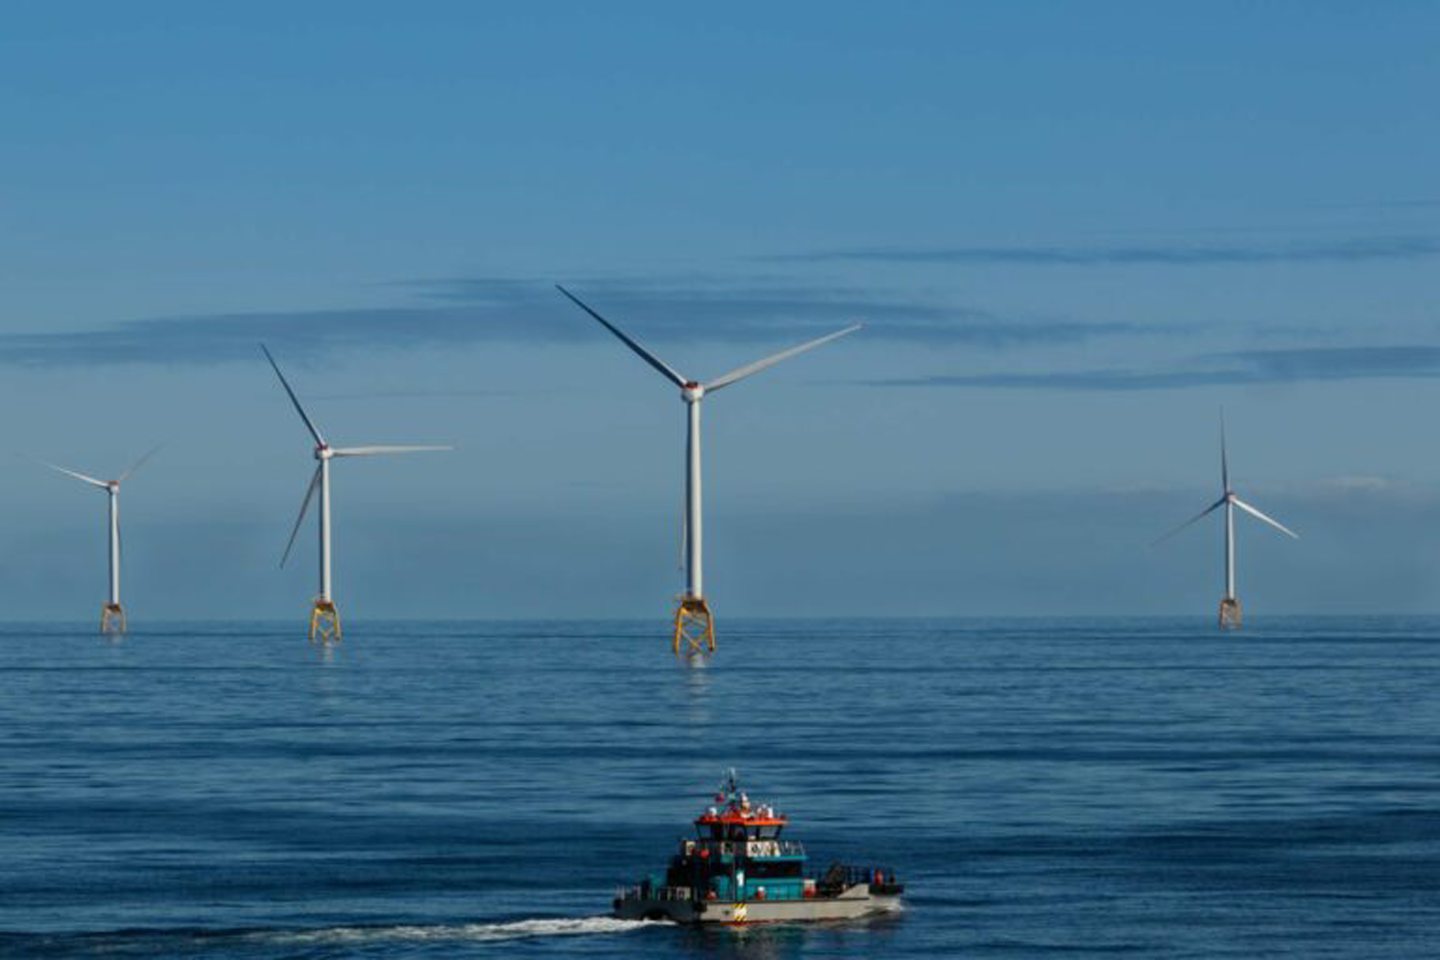 Cable failure top cause of offshore wind insurance claims, warns Allianz